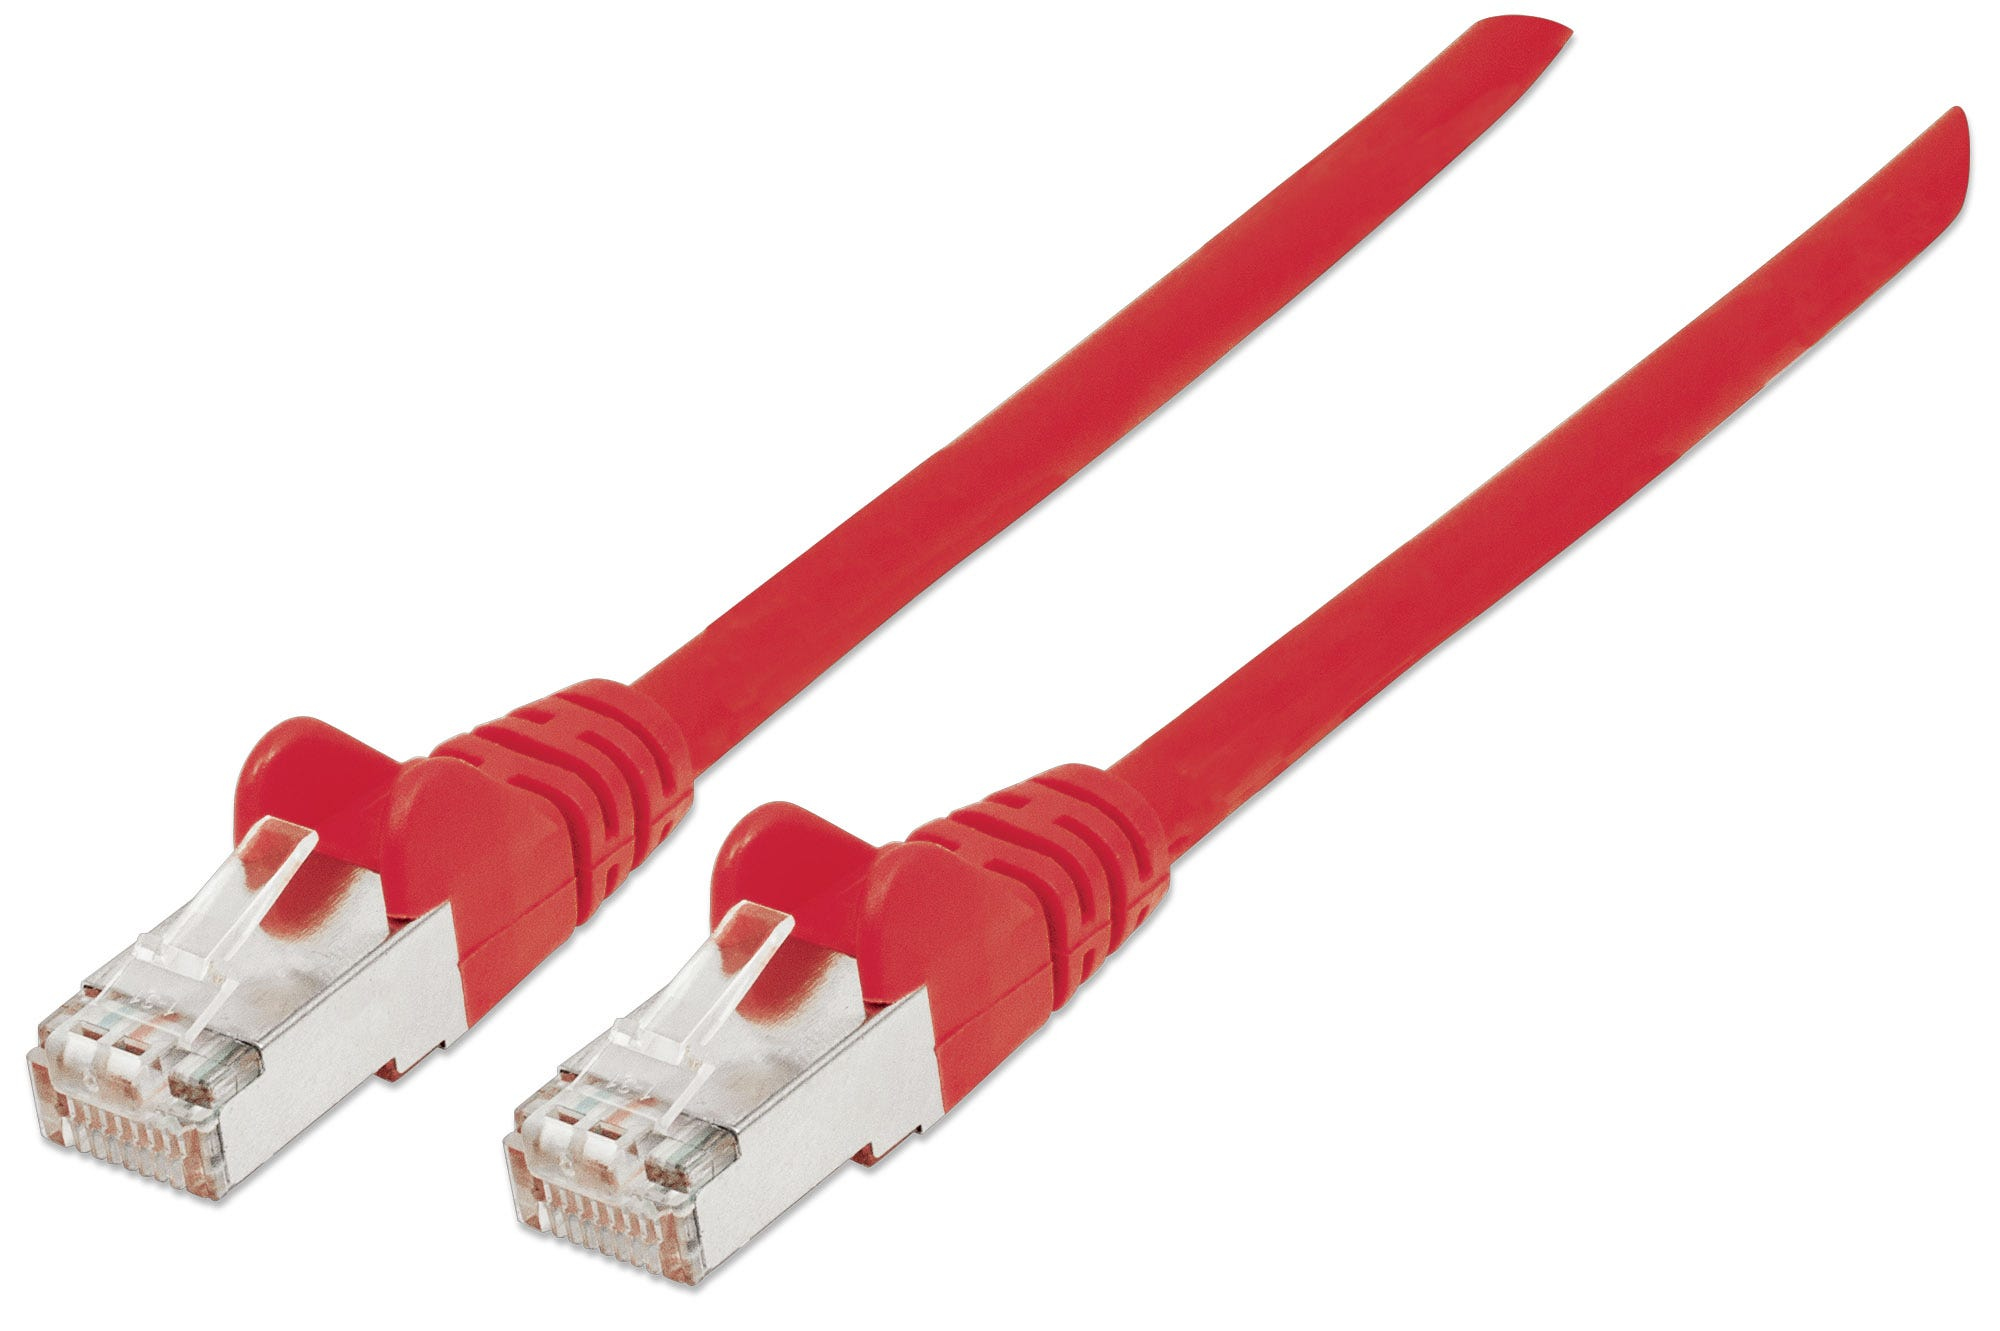 Photos - Cable (video, audio, USB) INTELLINET Network Patch Cable, Cat6, 5m, Red, Copper, S/FTP, LSOH / L 735 